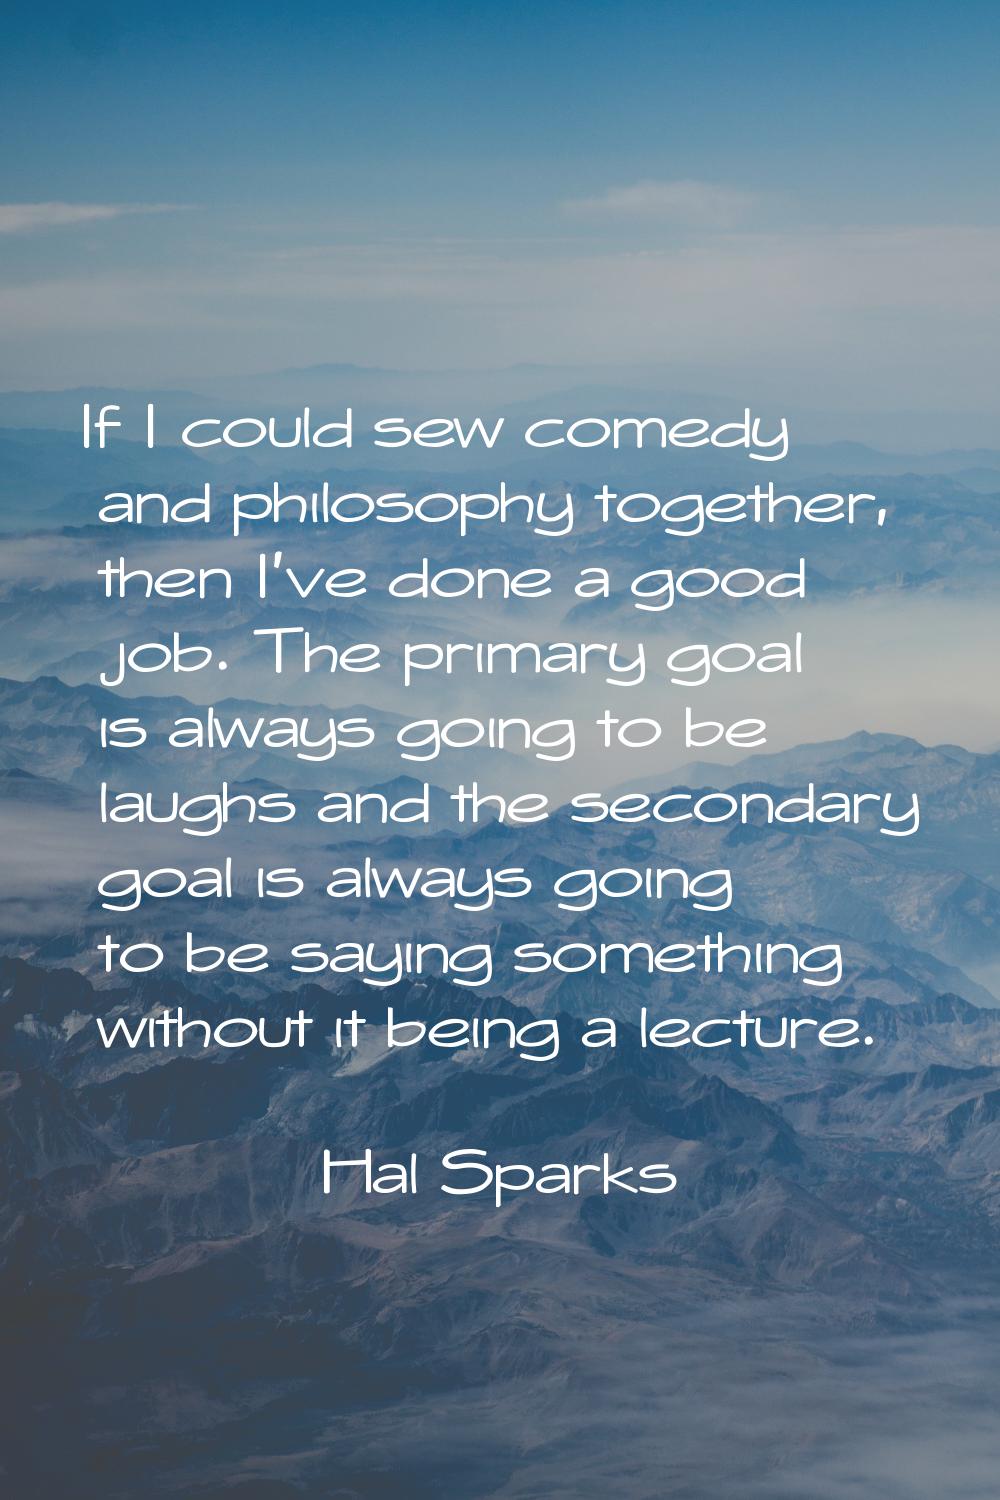 If I could sew comedy and philosophy together, then I've done a good job. The primary goal is alway